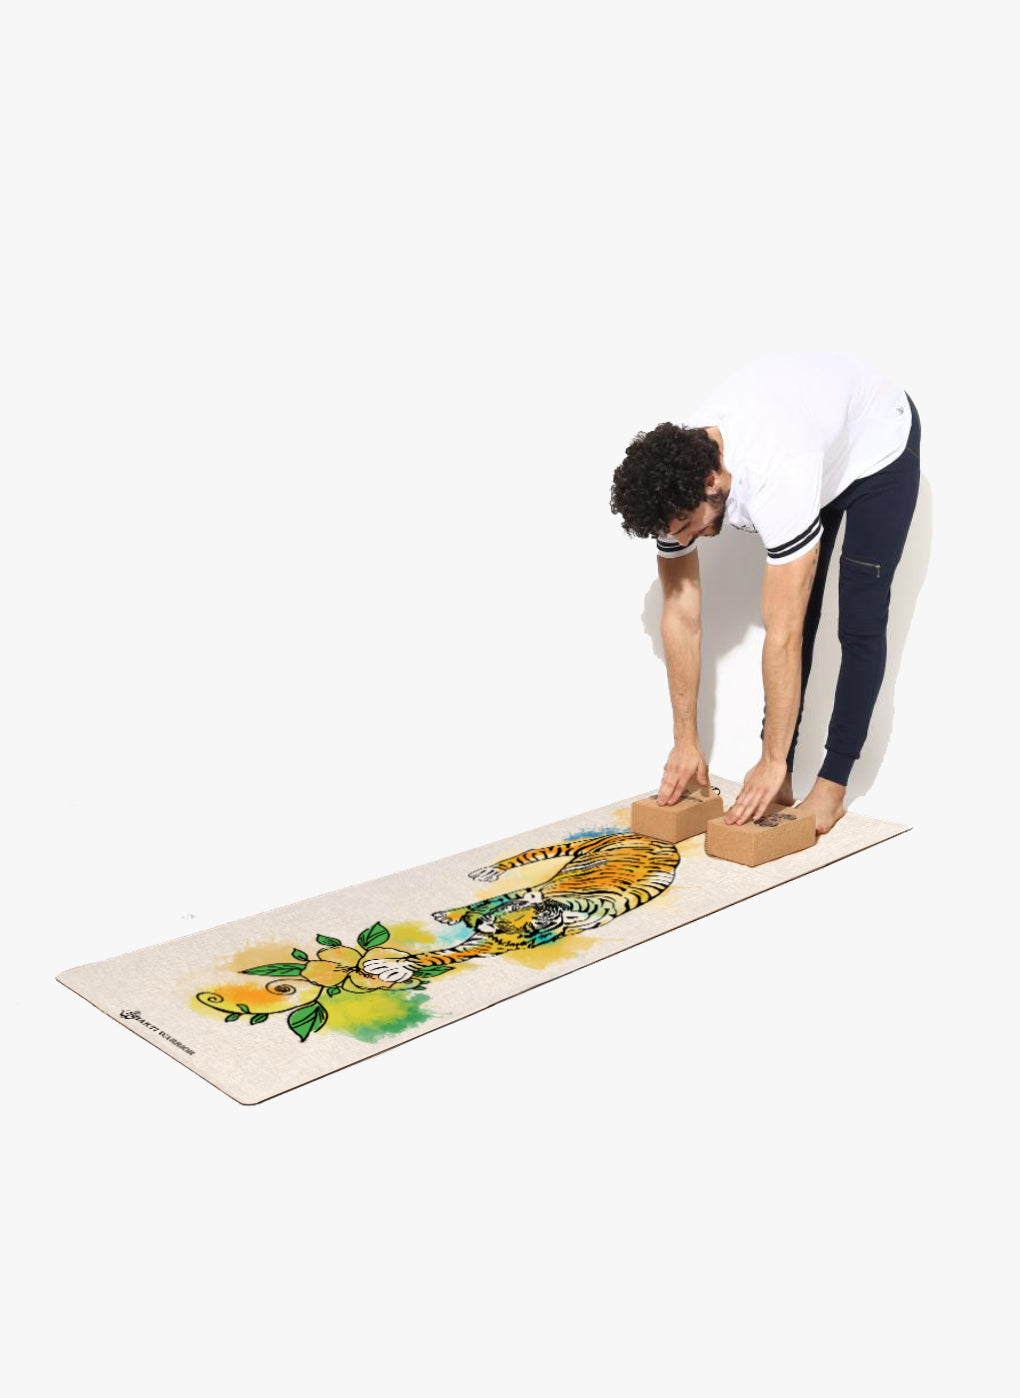 Shakti Warrior Tiger Hemp Yoga Mat - Embrace the strength and intuition of tigers on a sustainable hemp mat. Elevate your practice with eco-conscious luxury, grip, and transformative yoga experience